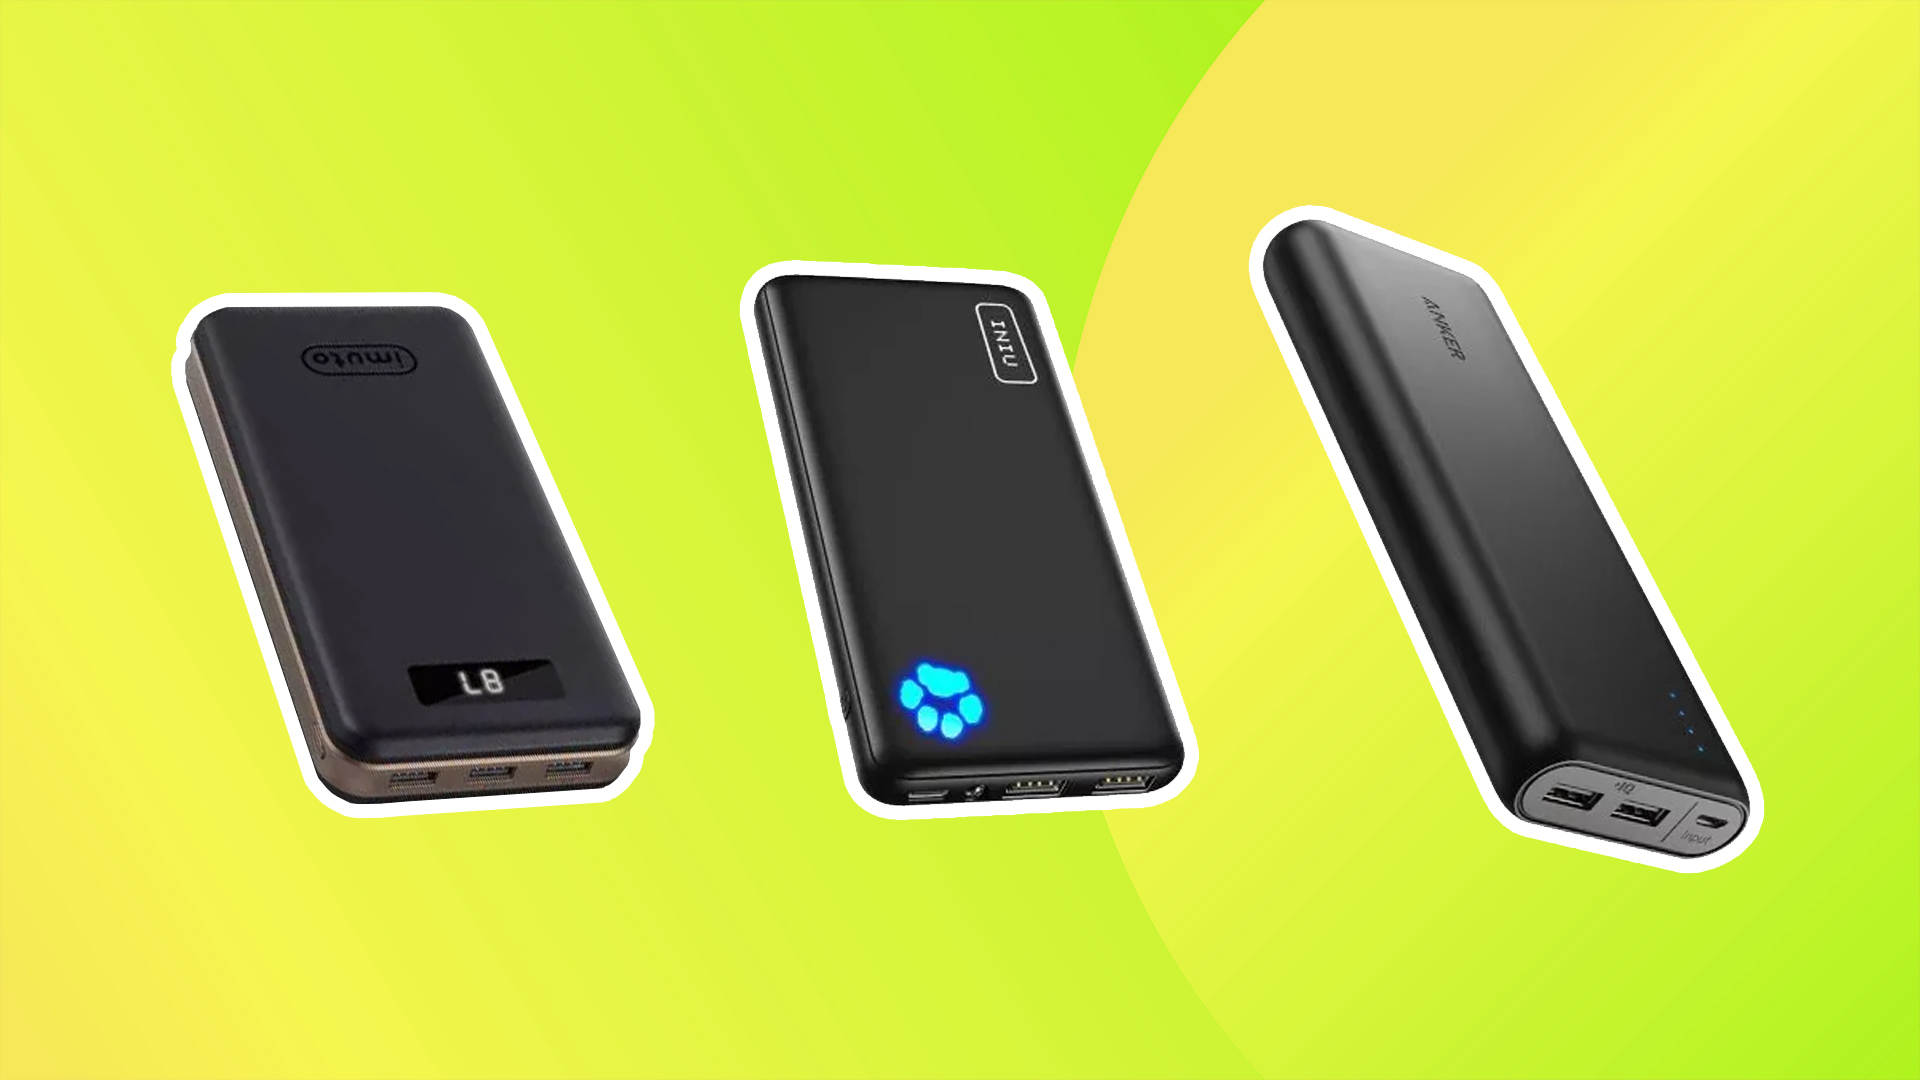 UGREEN 100 W Power Bank with 25000 mAh capacity now available -   News